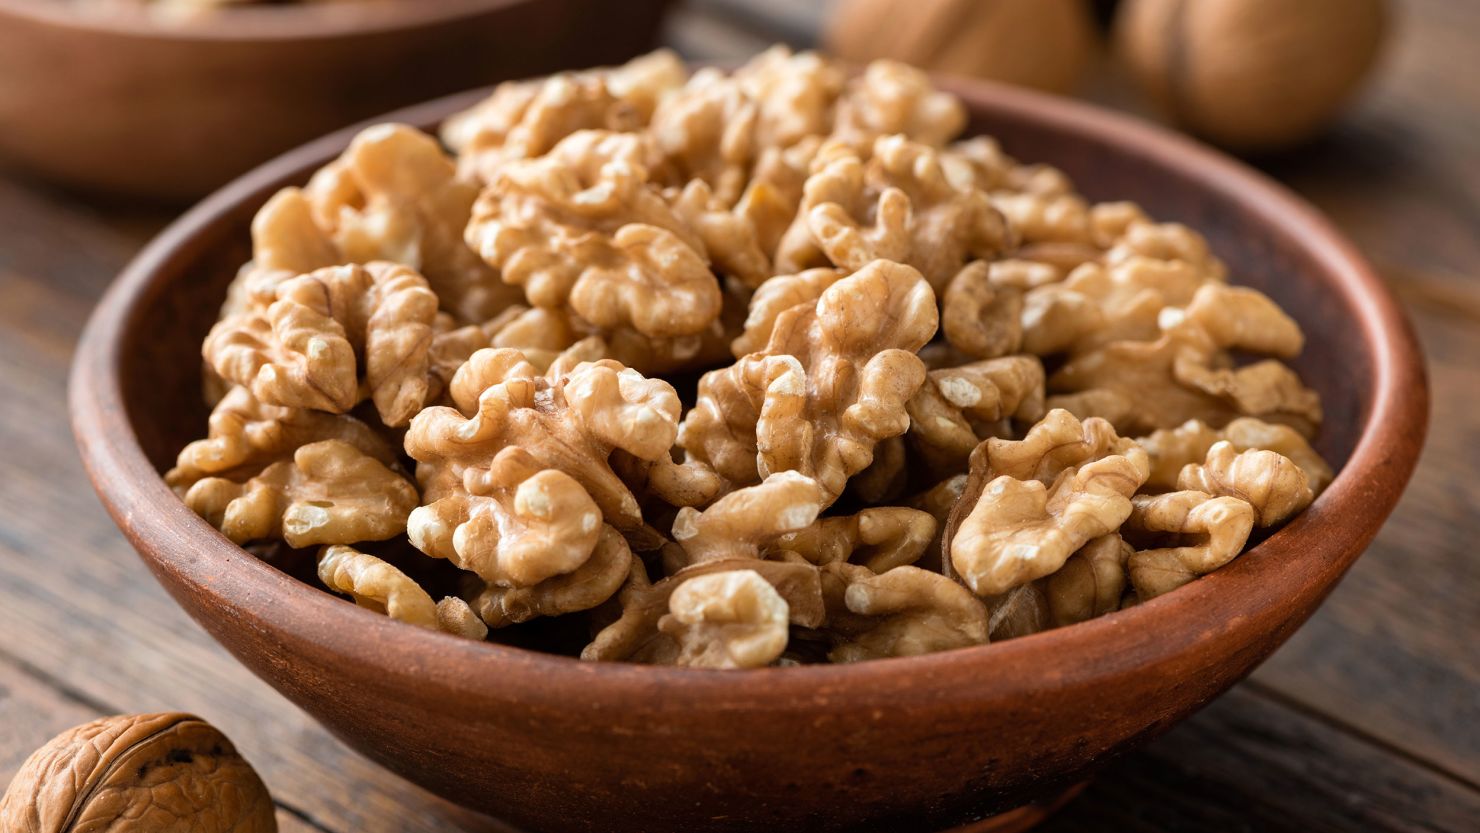 Gibson Farms has recalled organic walnuts linked to an outbreak of E. coli.